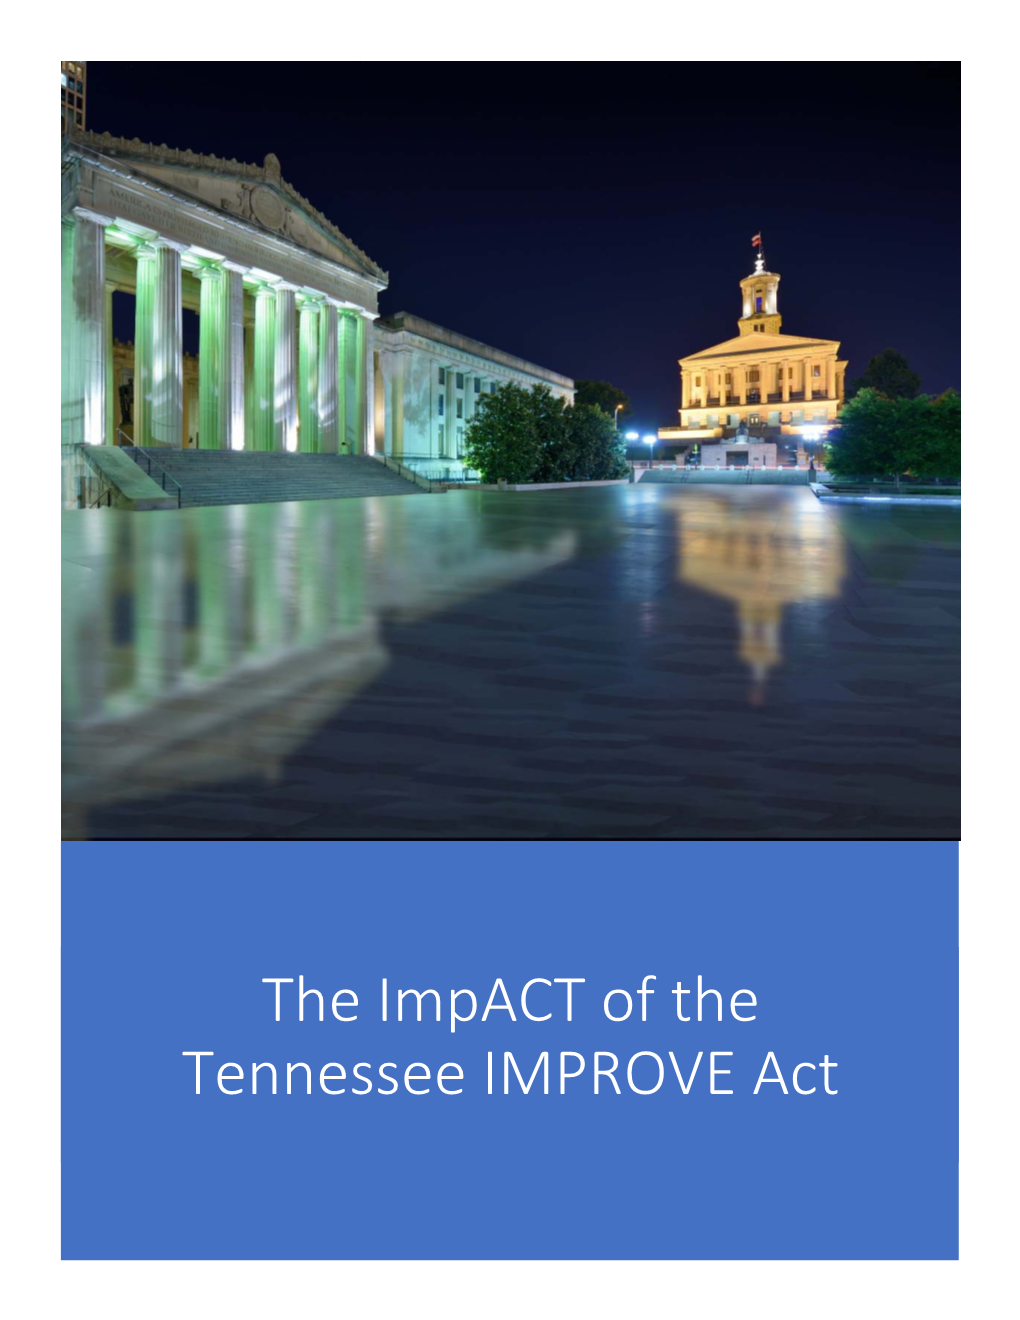 The Impact of the Tennessee IMPROVE Act